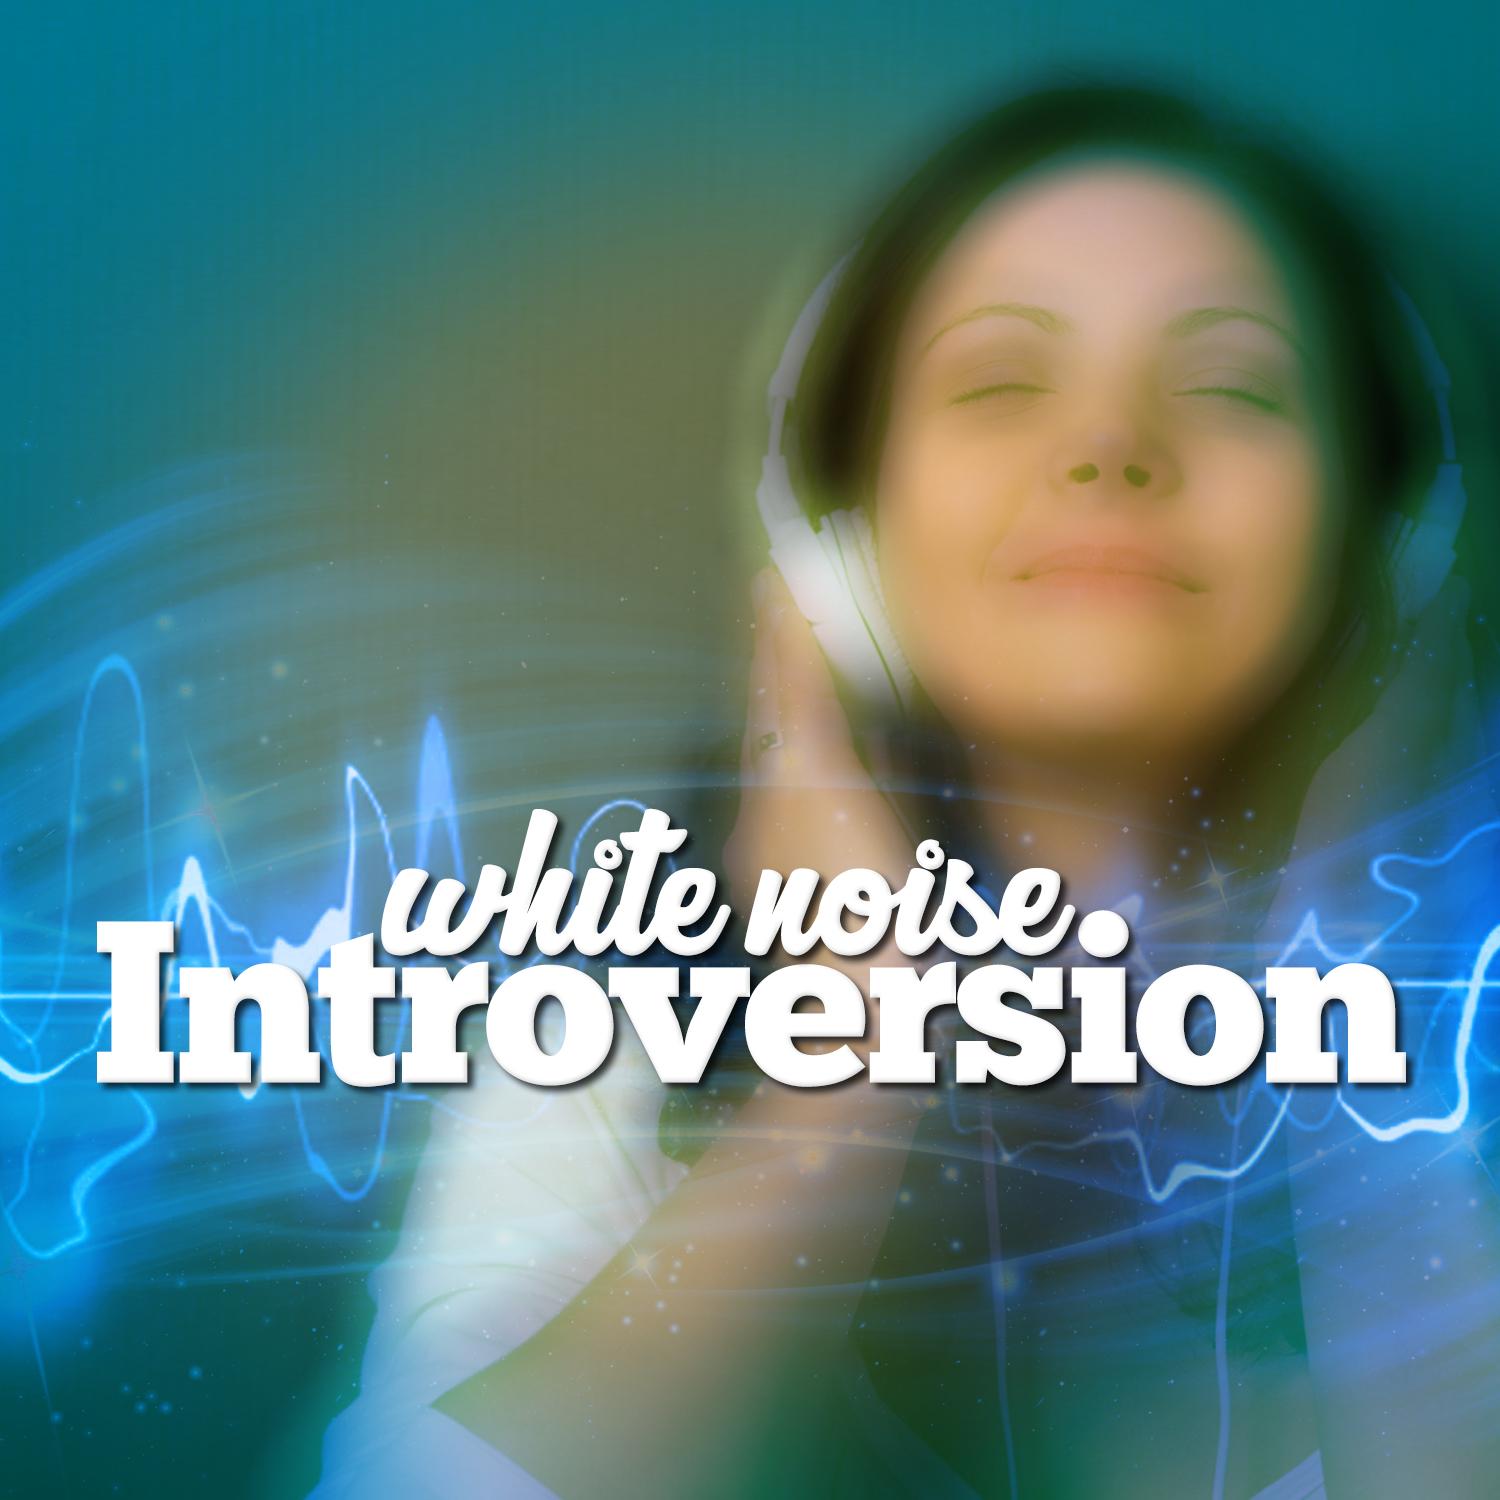 White Noise: Introversion